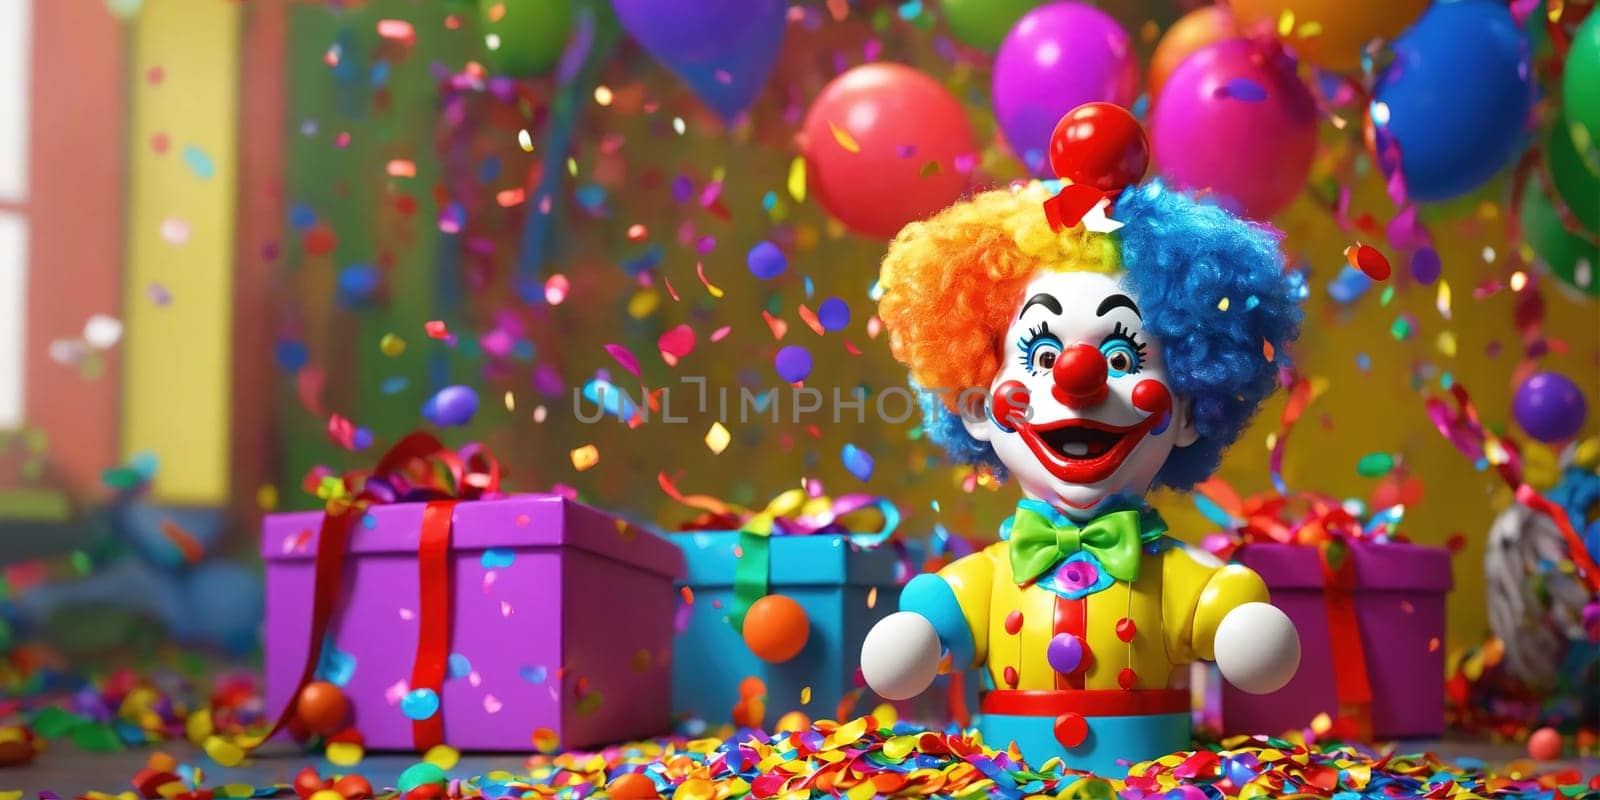 A cheerful and bright clown for a children's party by gordiza